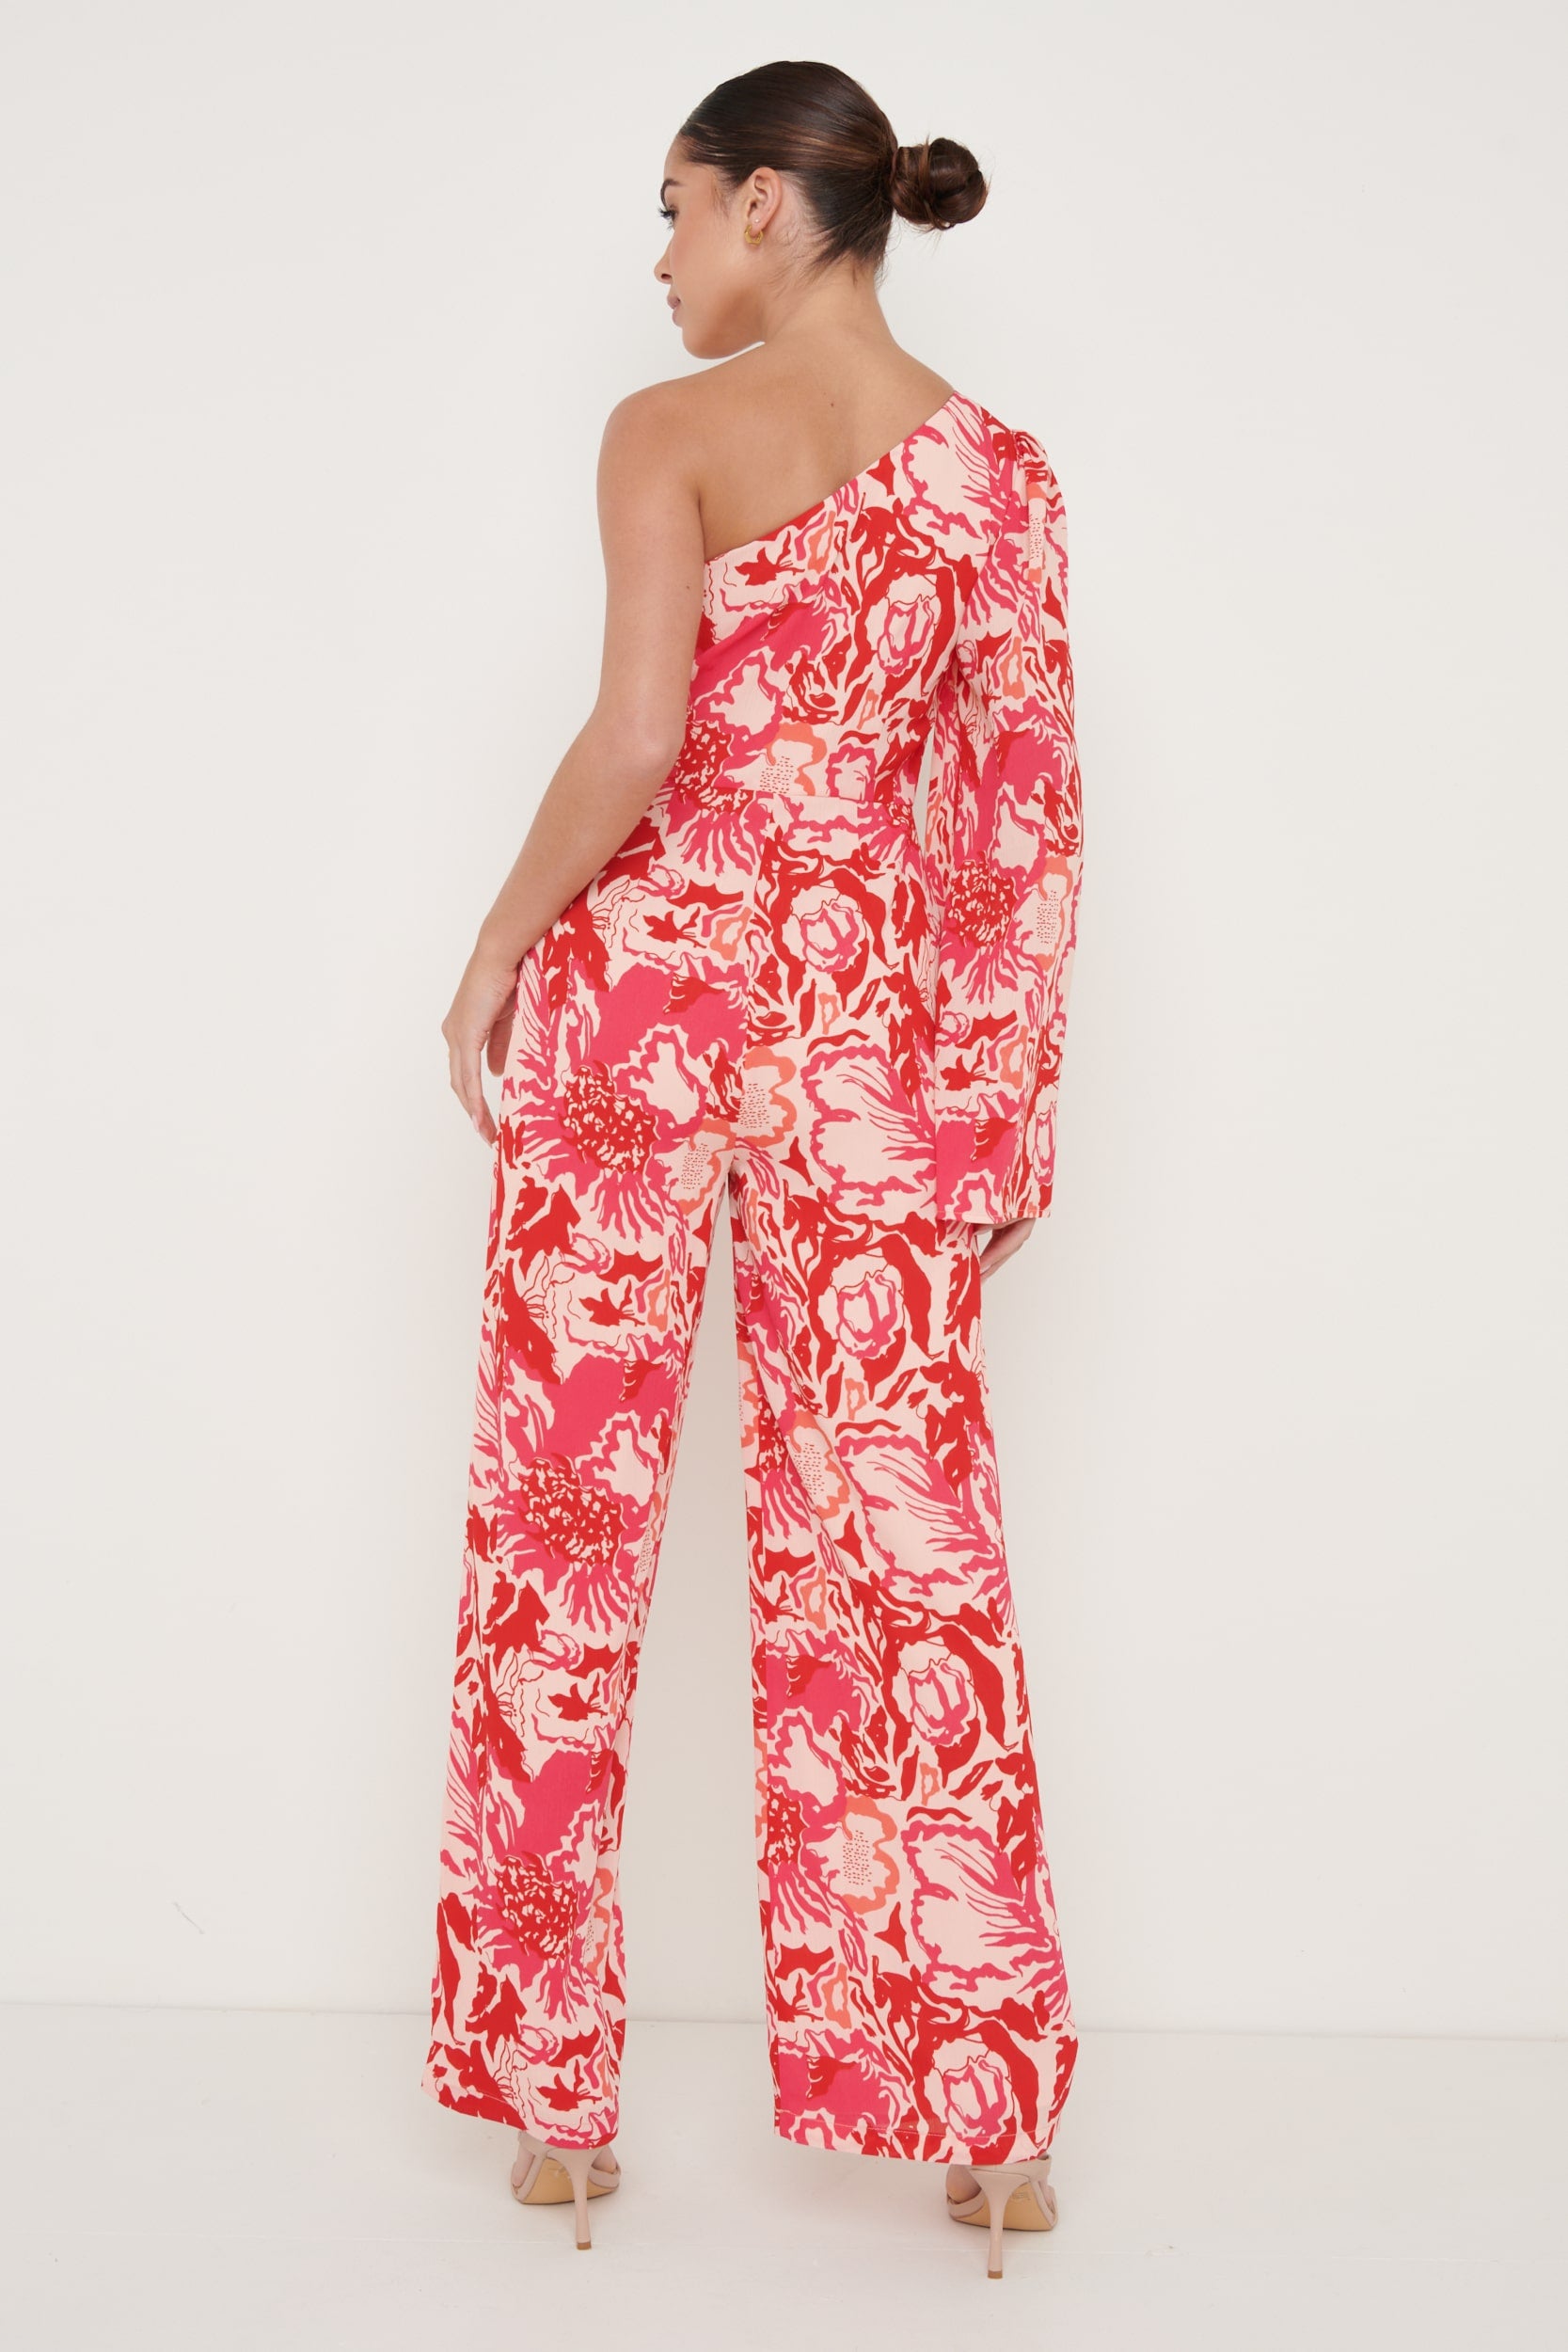 Maddie One Shoulder Printed Jumpsuit - Pink and Red Floral – Pretty Lavish